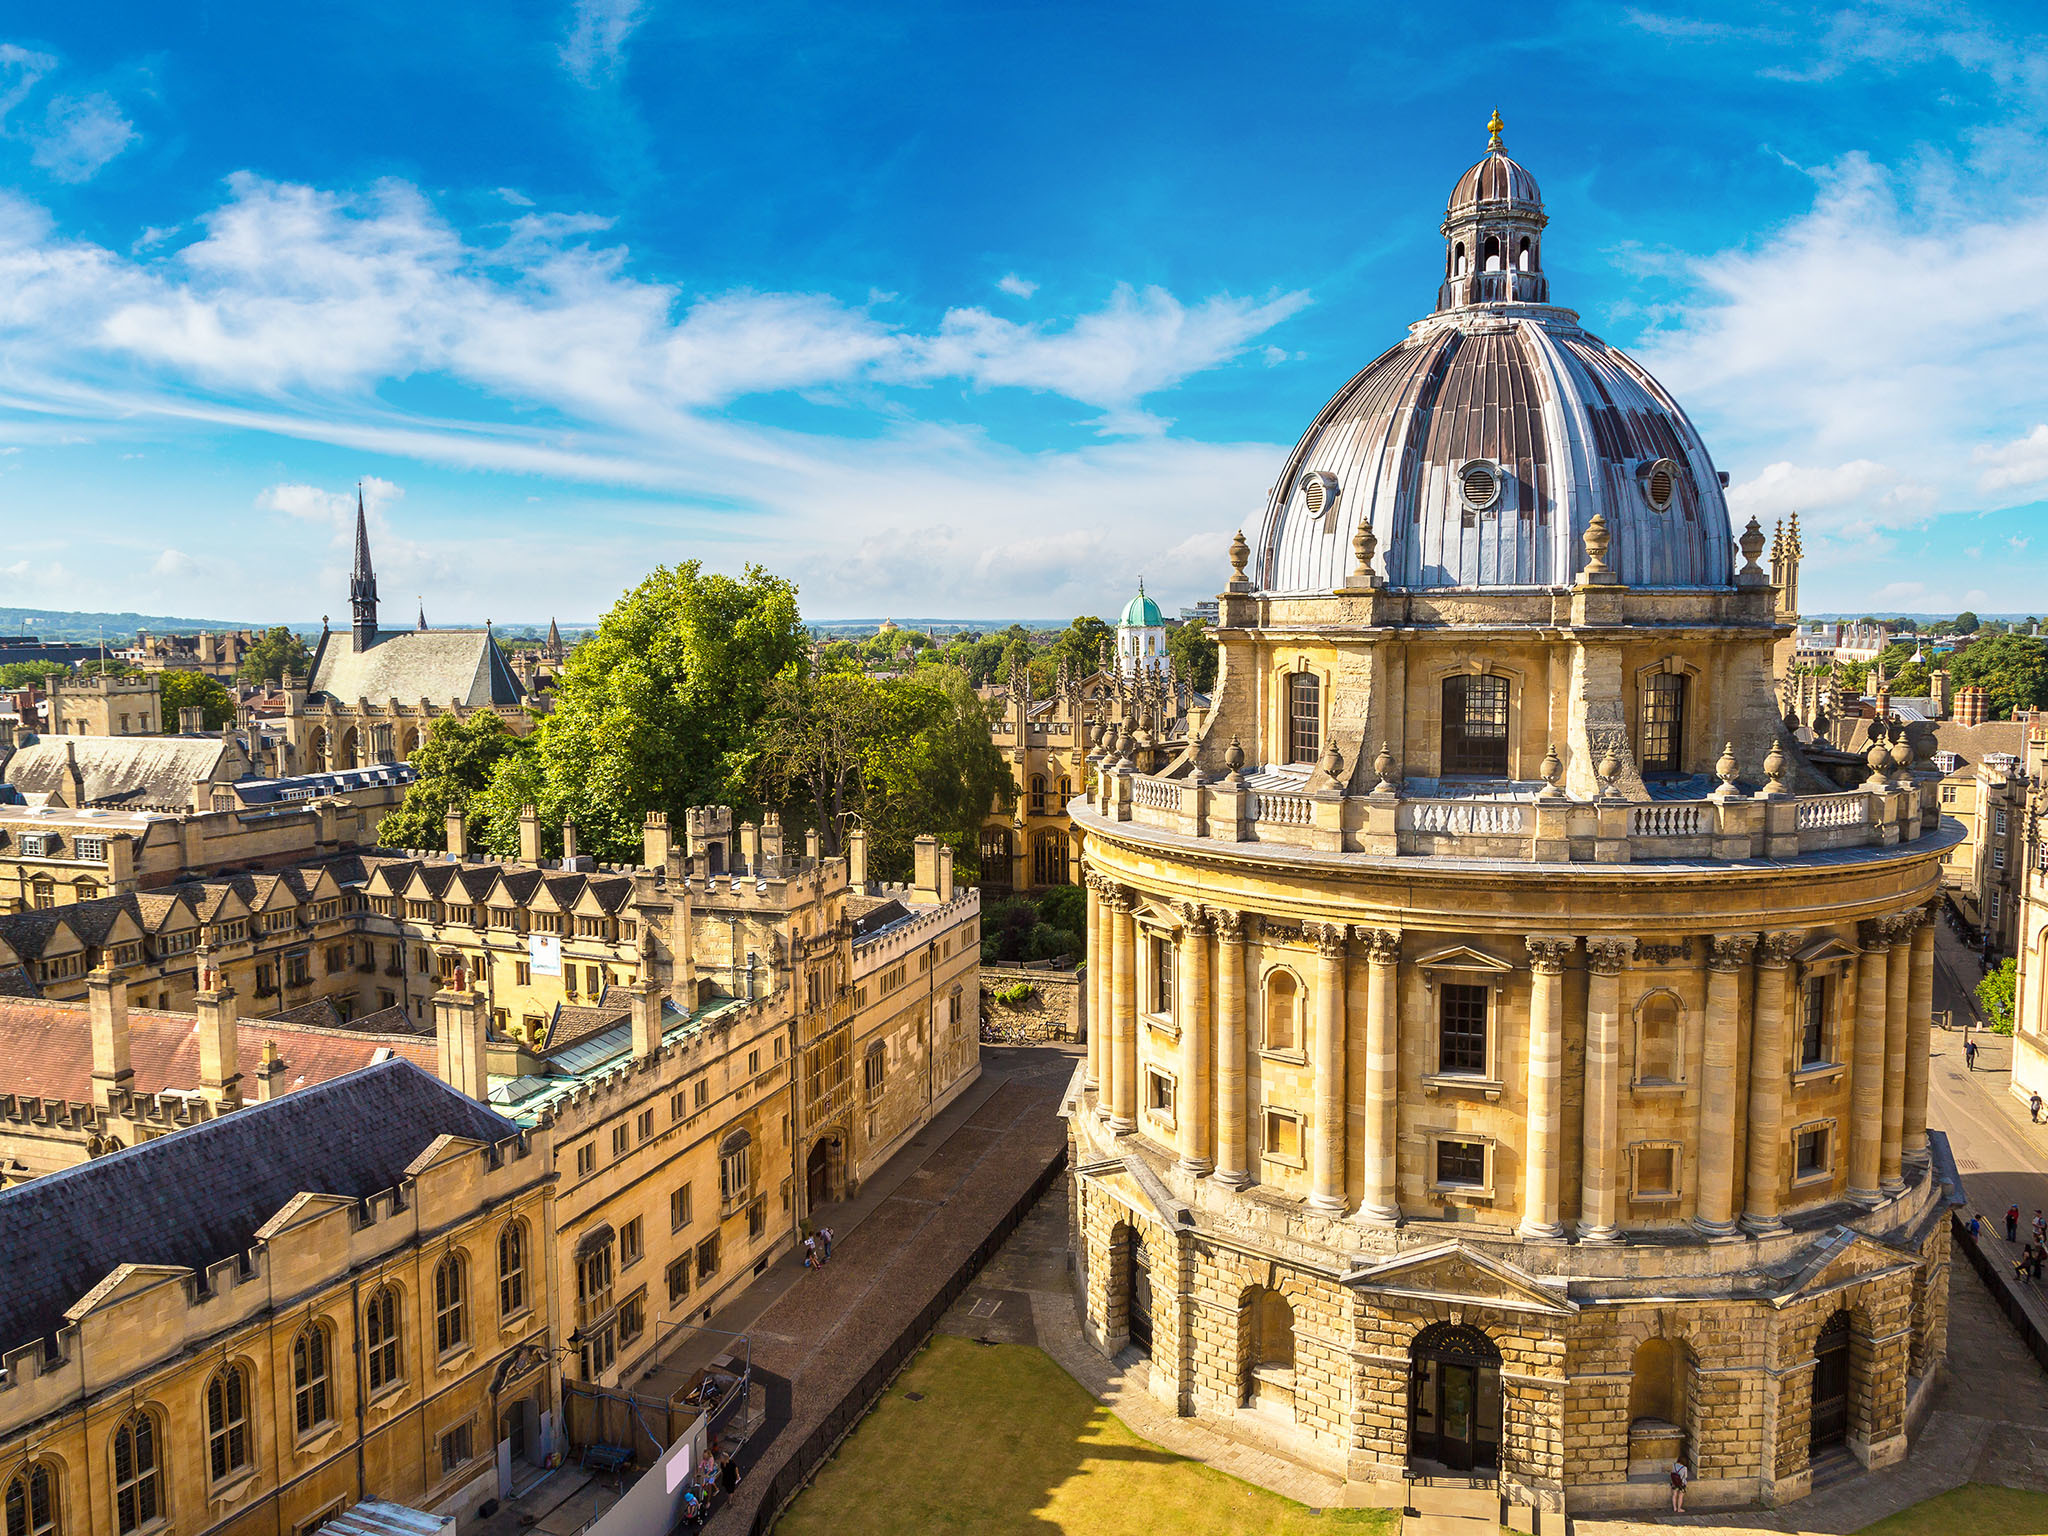 8 Interesting Things To Do When You Visit Oxford, England